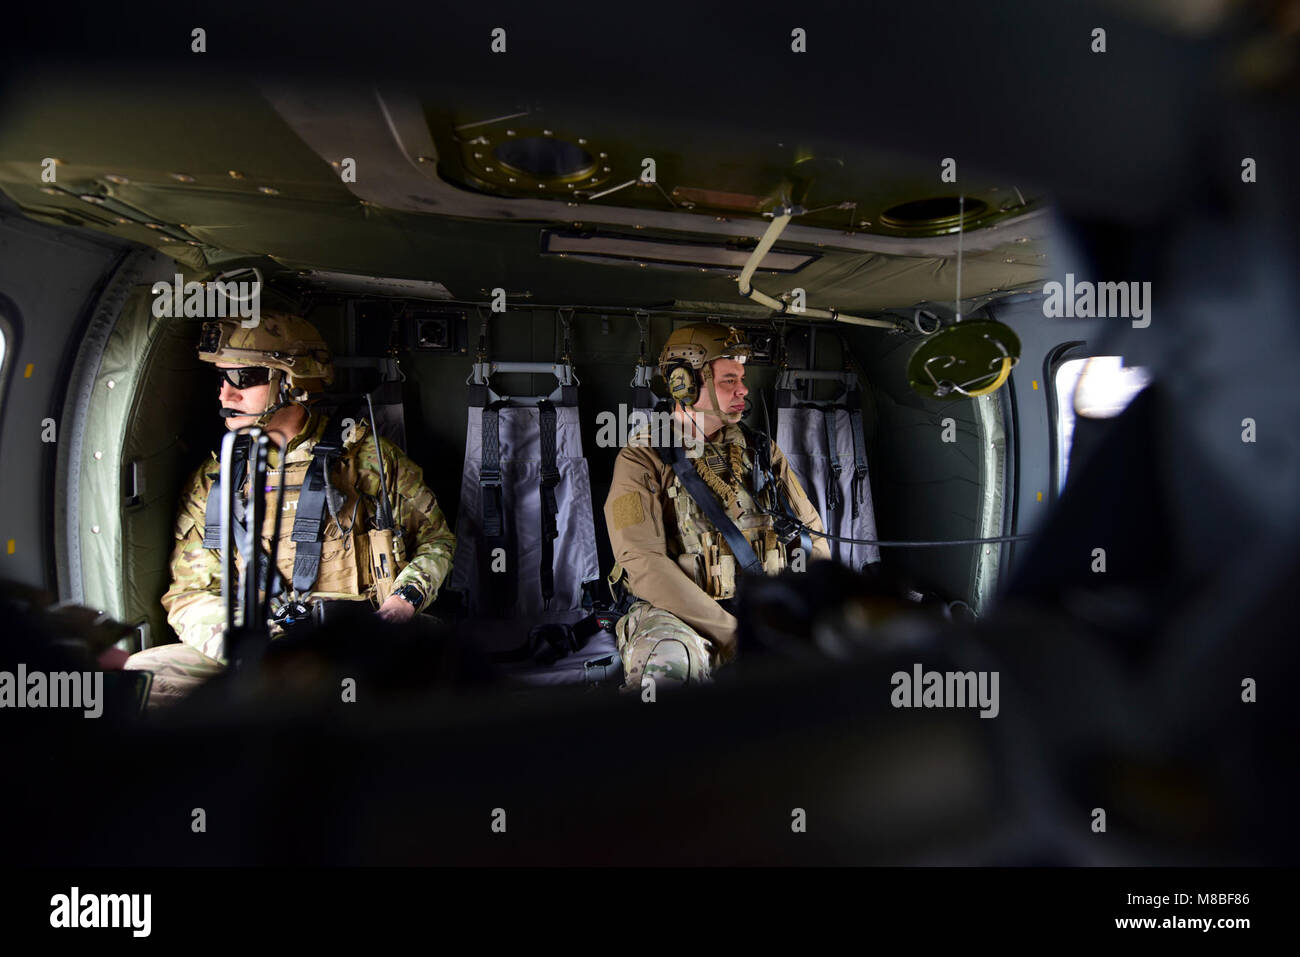 Joint Terminal Attack Controllers ride in a UH-0 Black Hawk during a joint training at Warsaw, Mo., Jan. 31, 2018. The training, titled Truman Relief, gave Whiteman Air Force Base, Mo., units the opportunity to go through scenarios involving JTACs capabilities. (U.S. Air Force by Staff Sgt. Danielle Quilla) Stock Photo